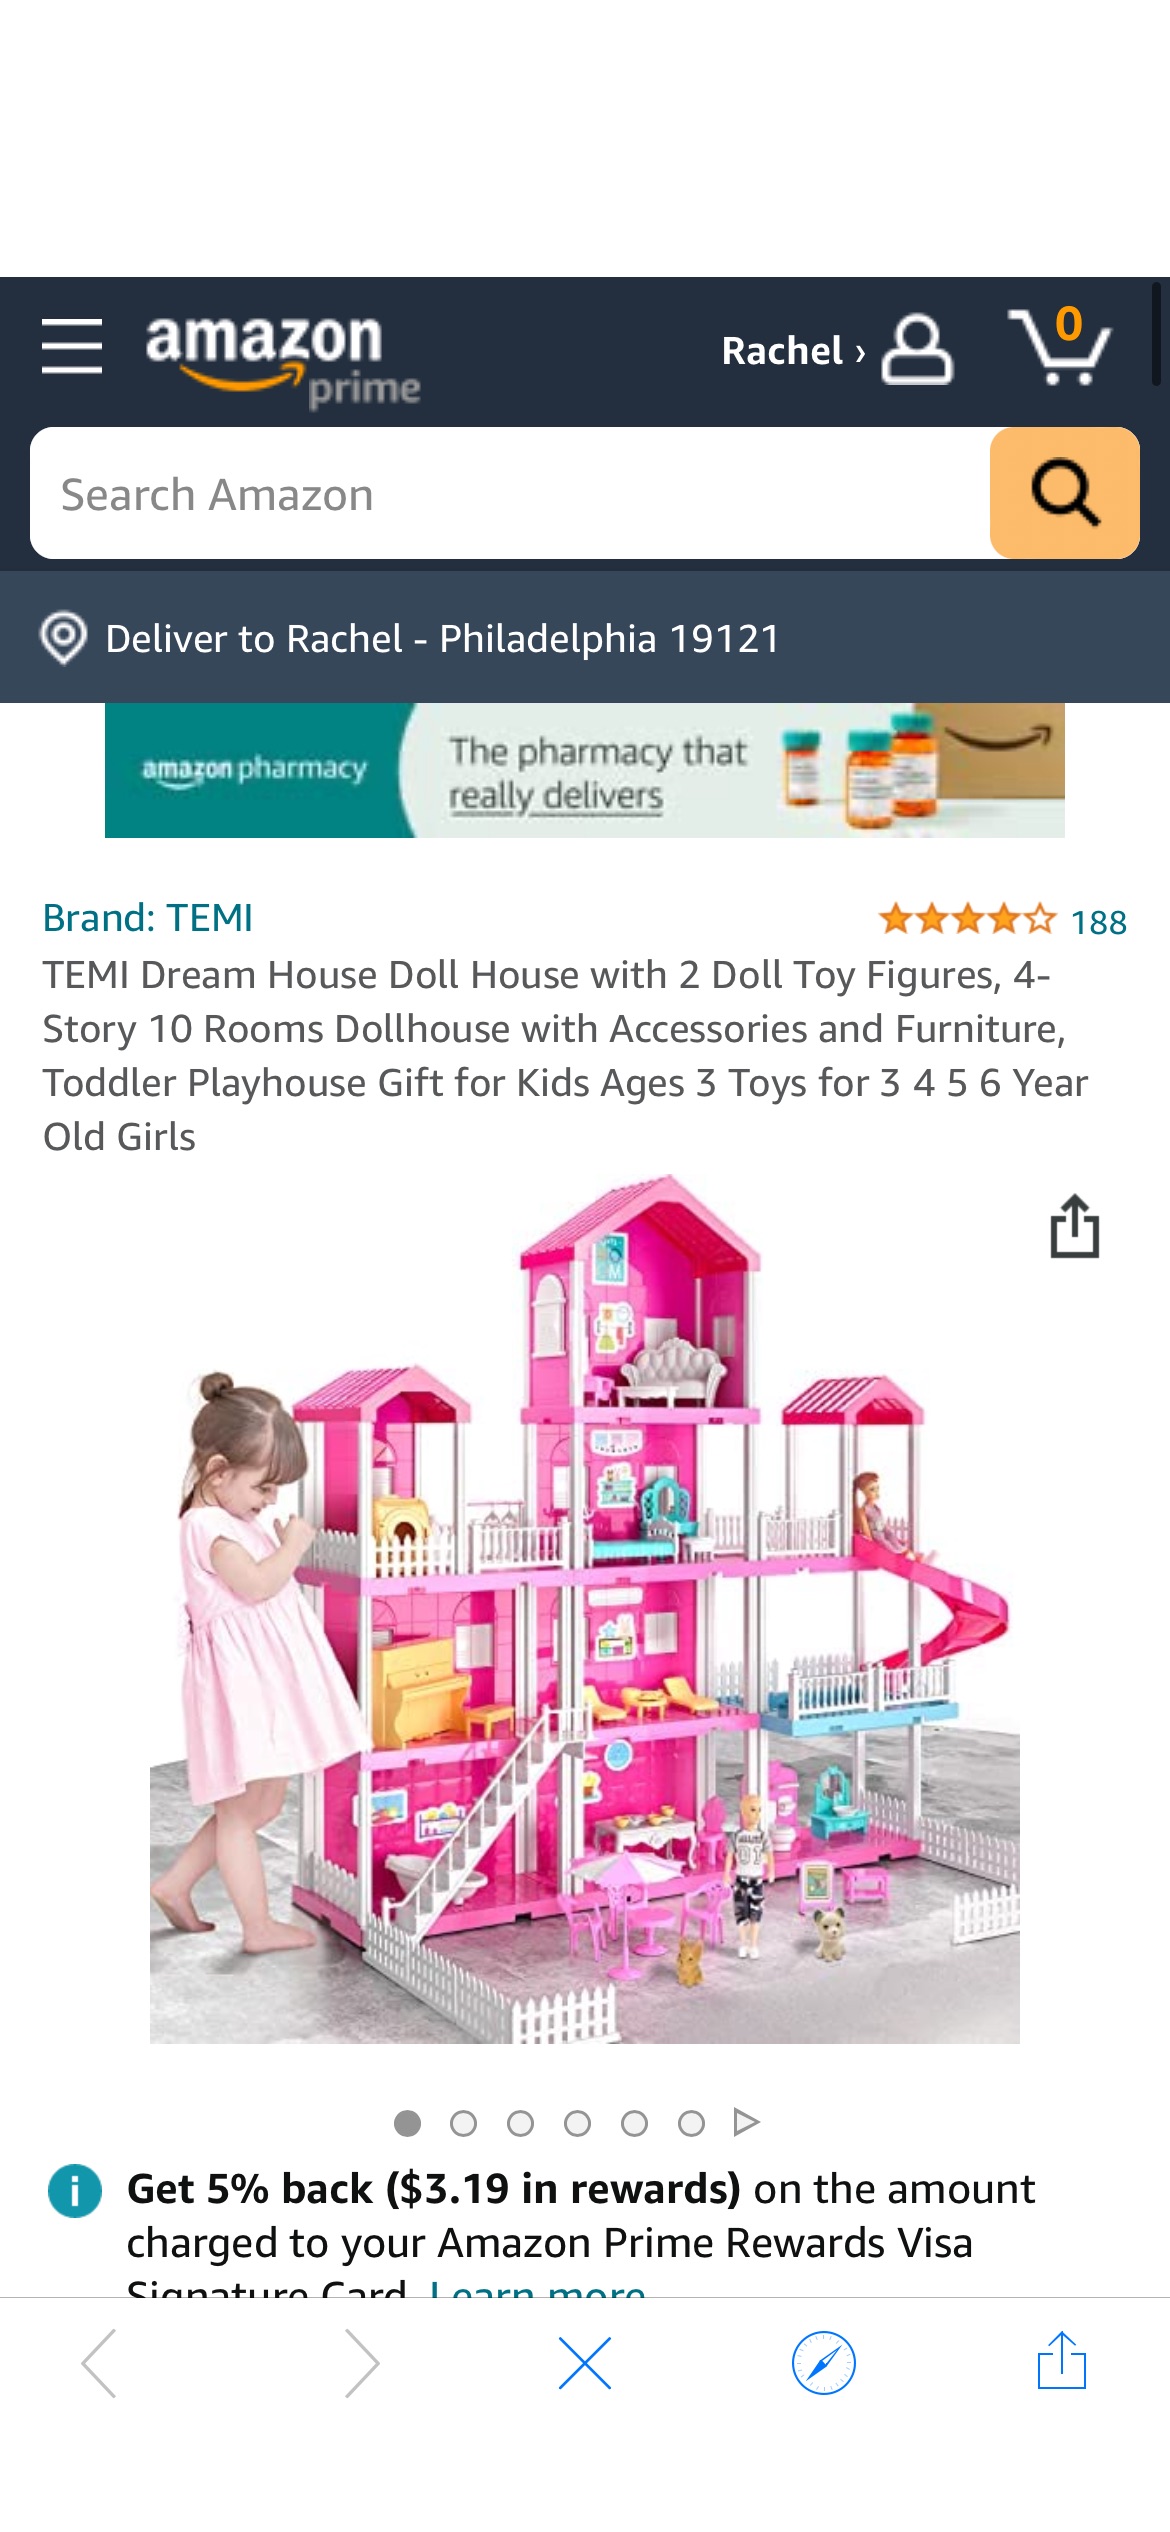 Amazon.com: TEMI Dream House Doll House with 2 Doll Toy Figures, 4-Story 10 Rooms Dollhouse with Accessories and Furniture, Toddler Toys & Games